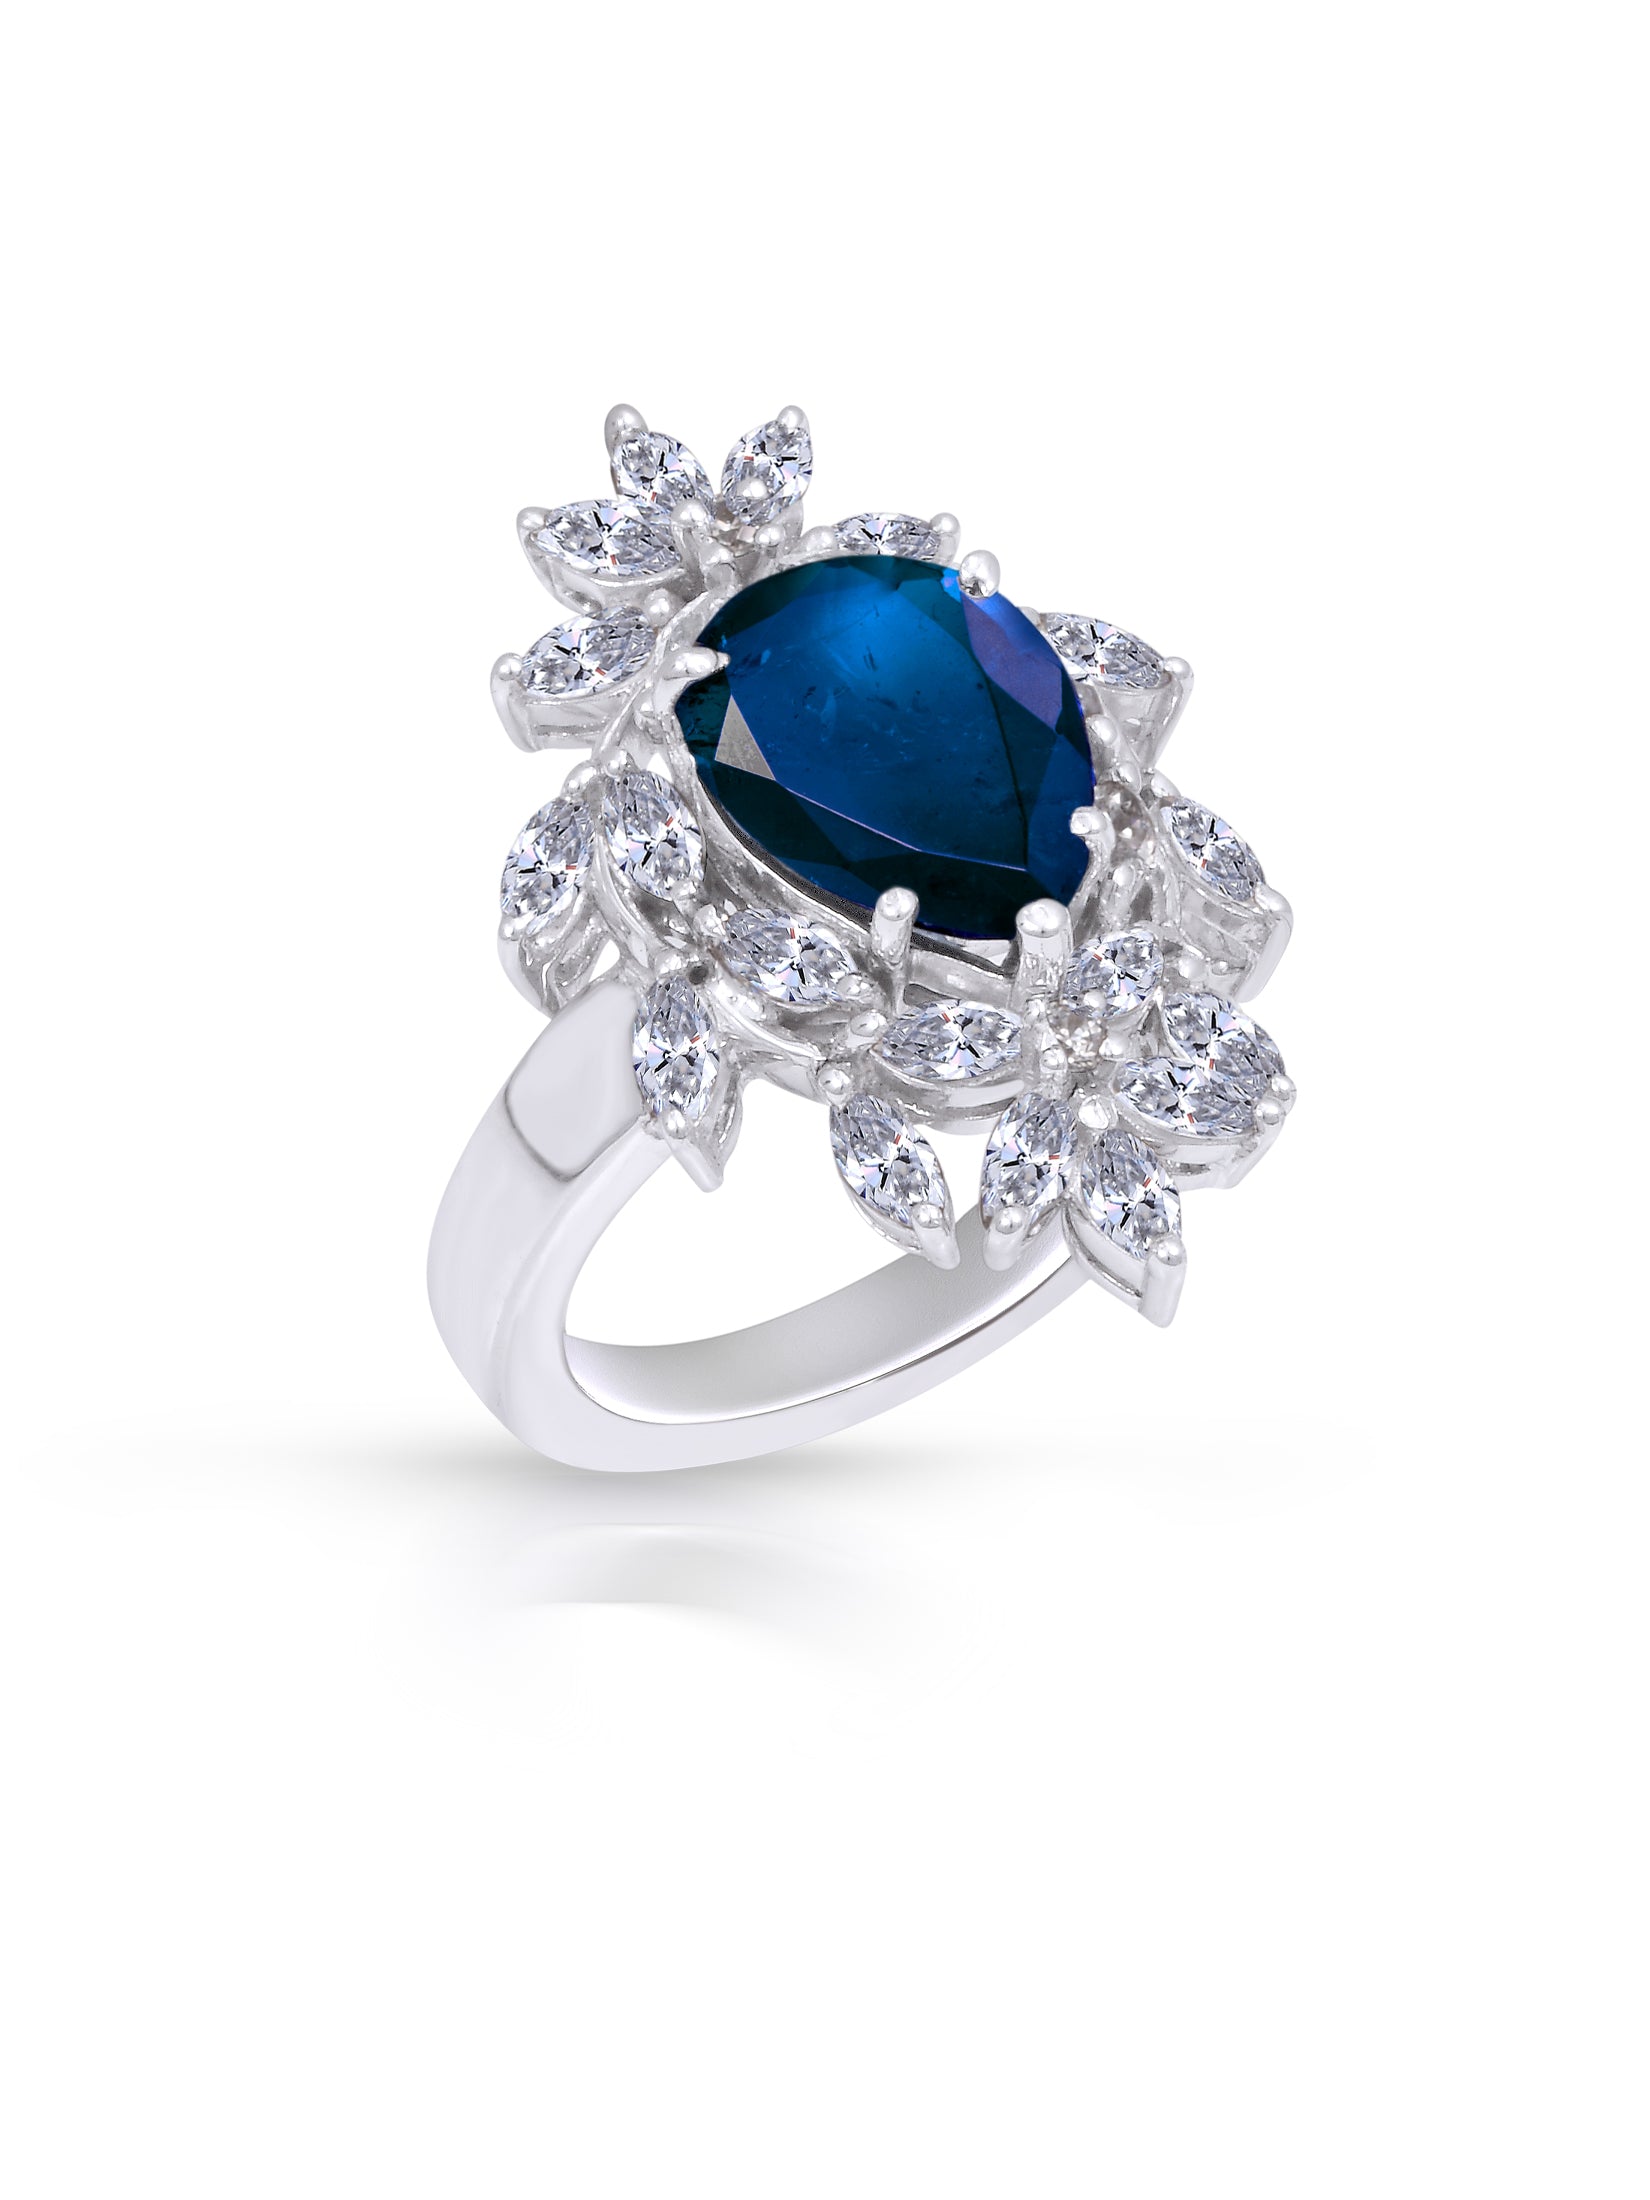 Blue and White Cocktail Ring